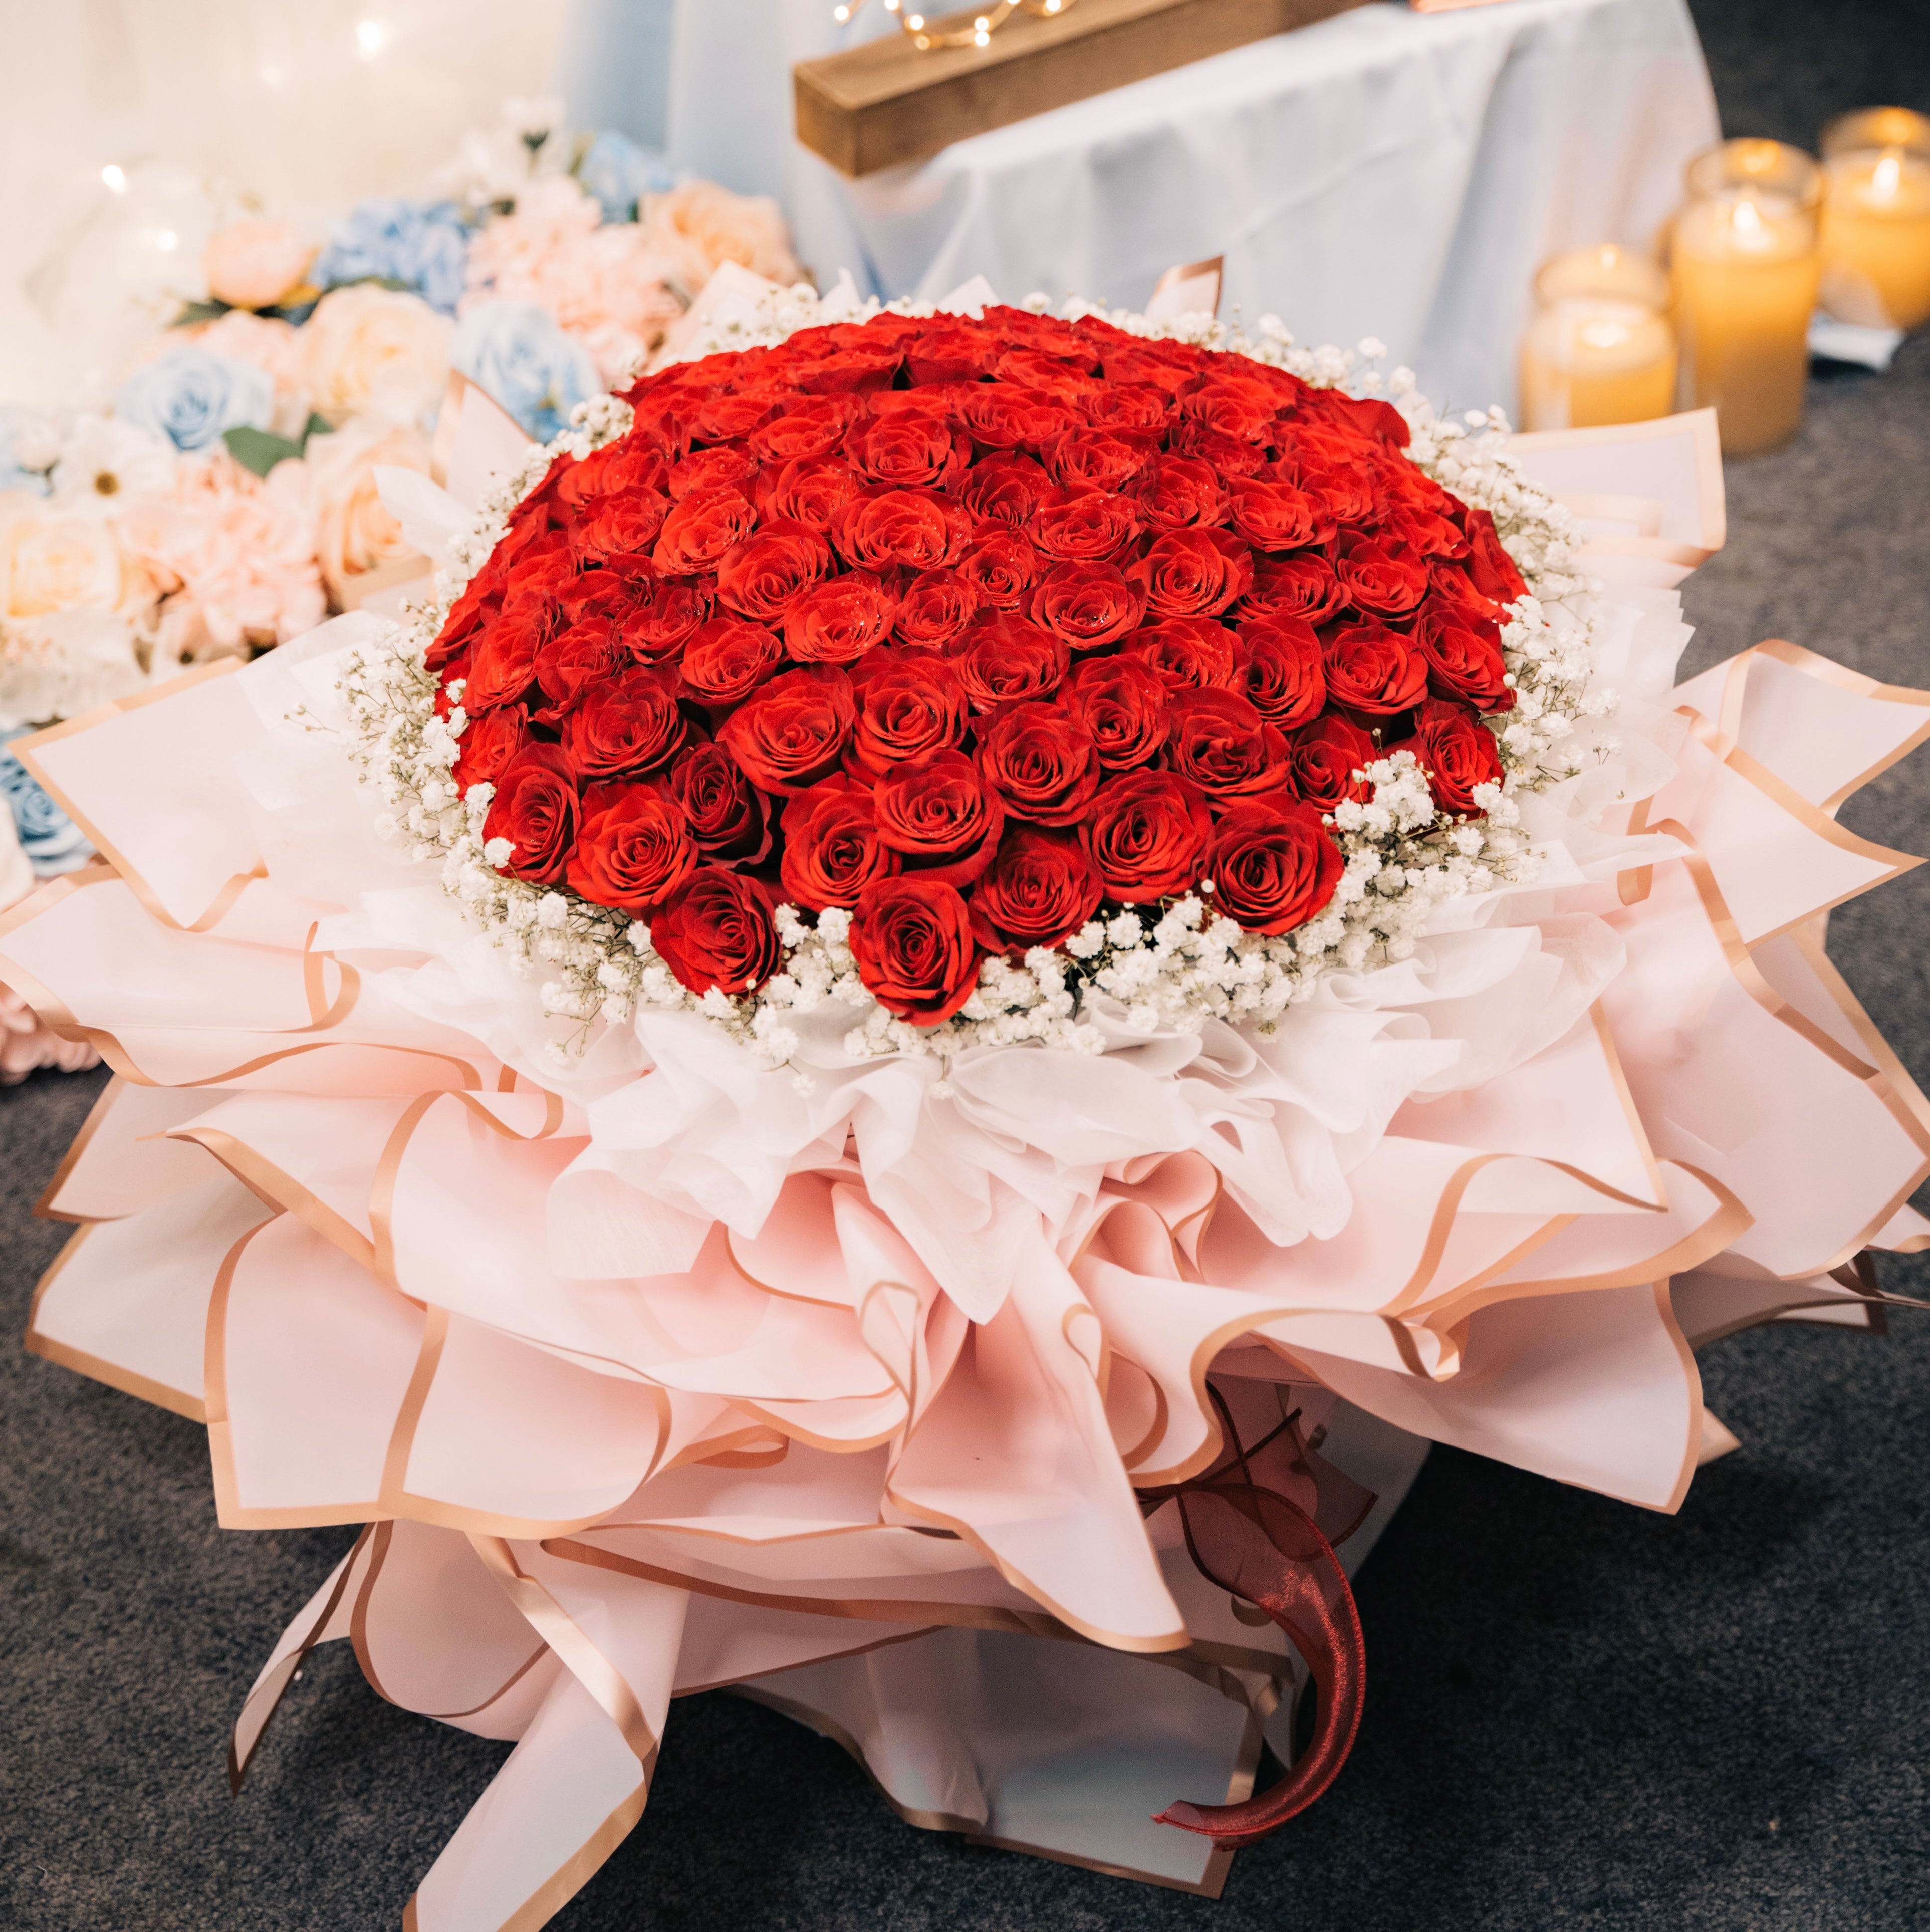 99 Fresh Red Roses Bouquet for Proposal in Singapore